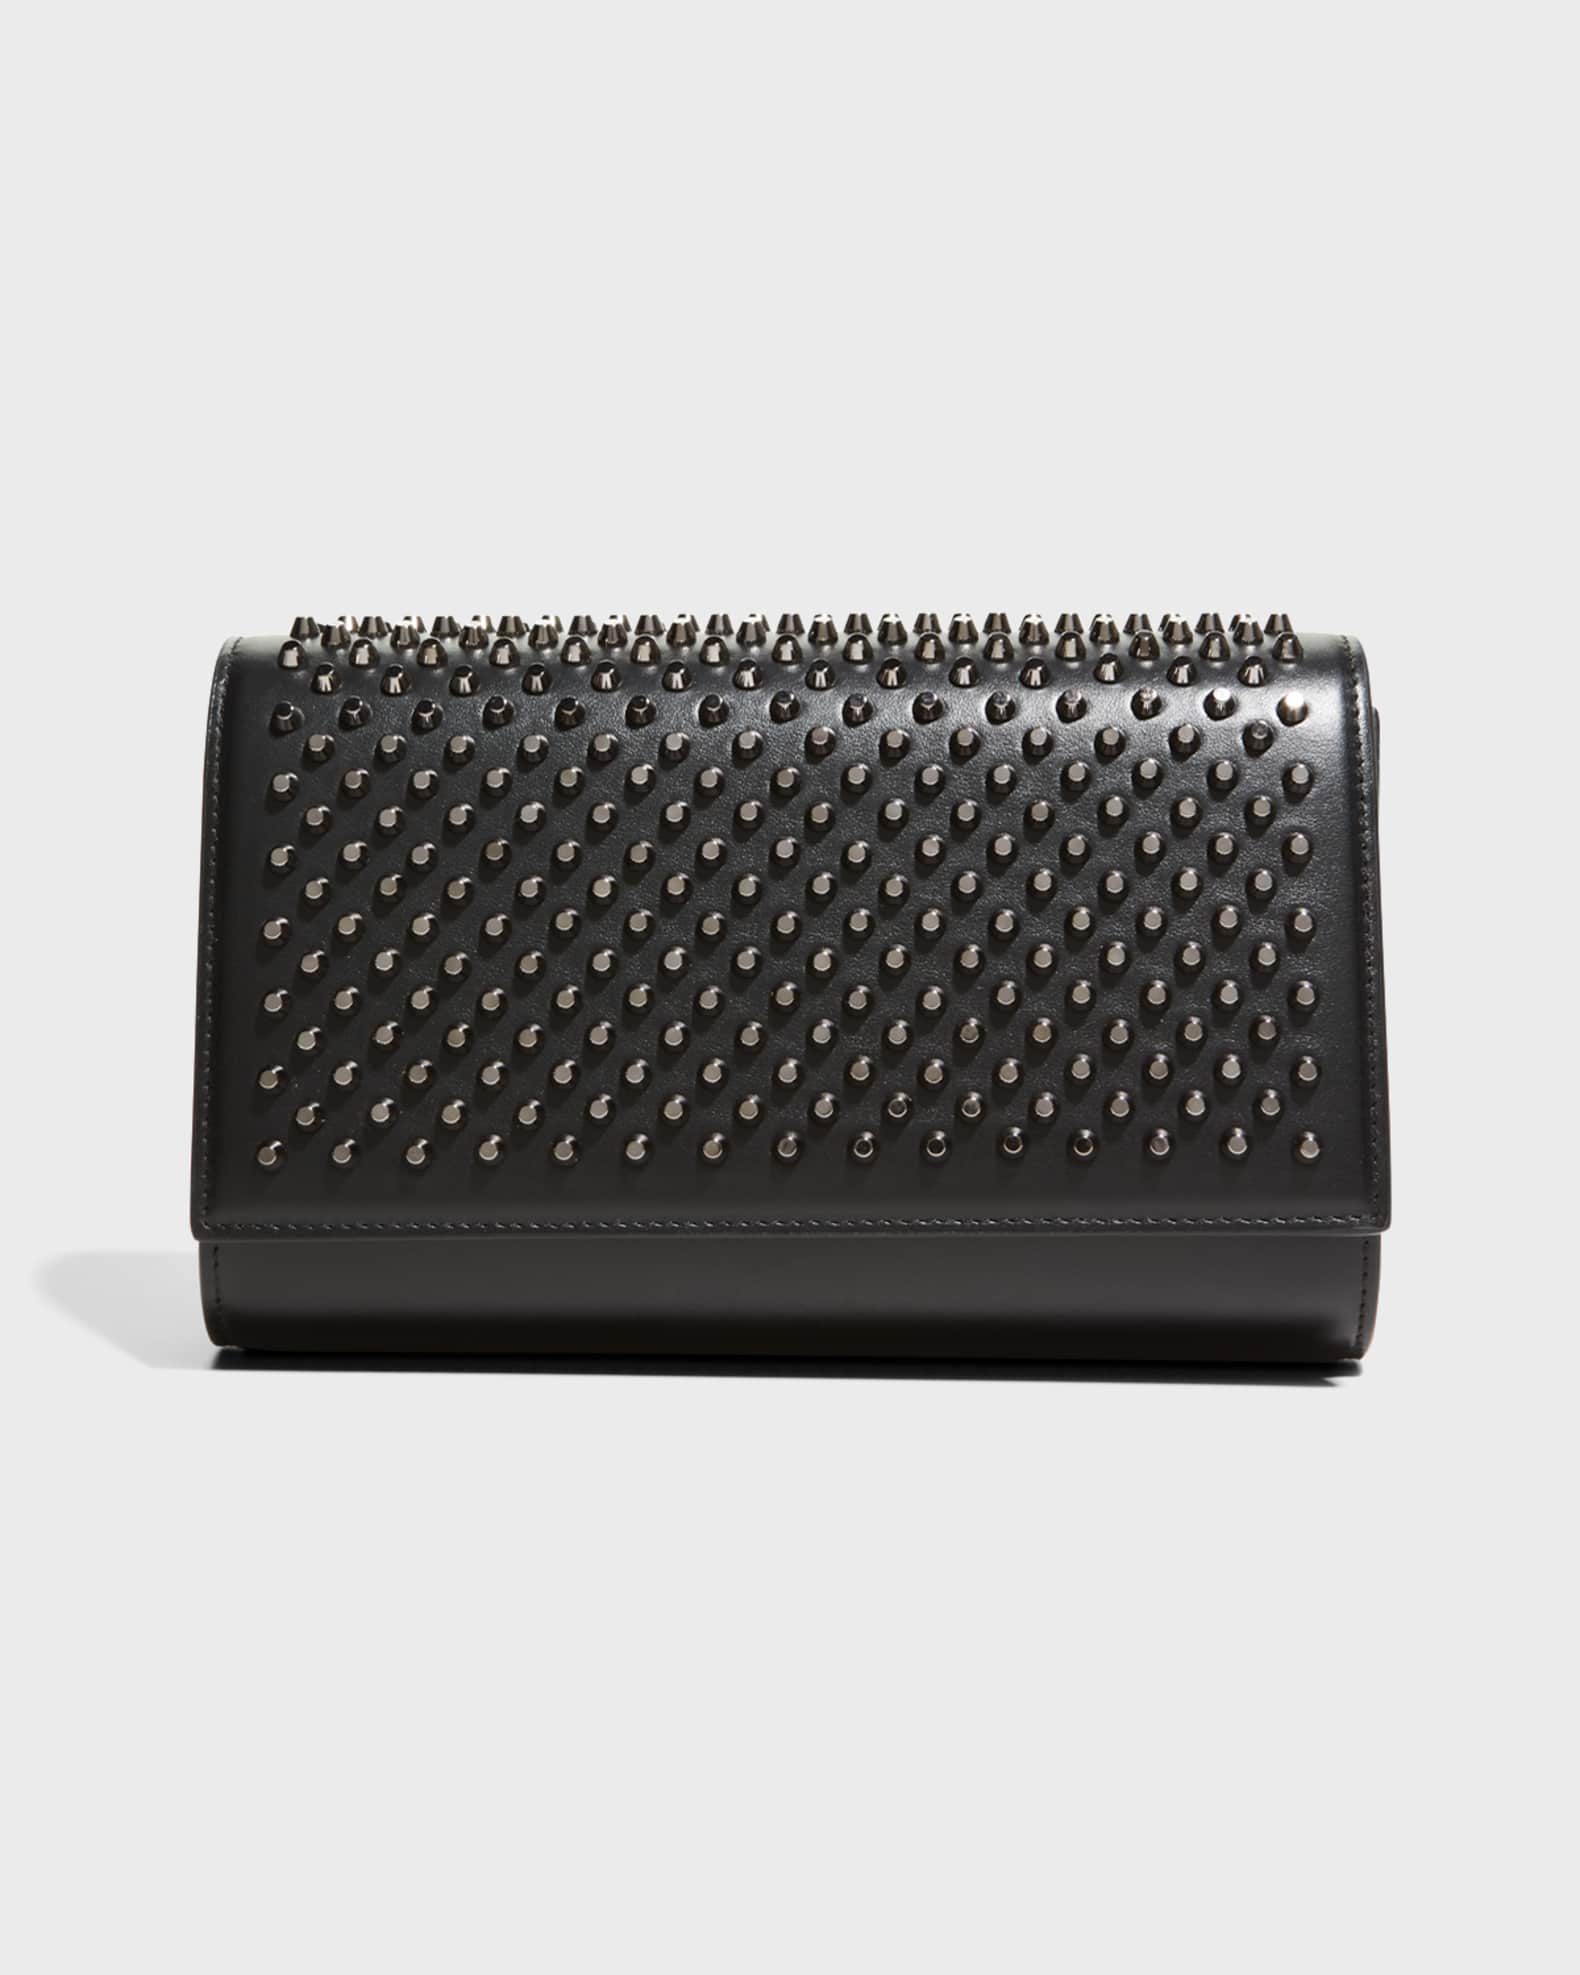 Christian Louboutin Paloma Leather Maxi Spike Shoulder Bag in